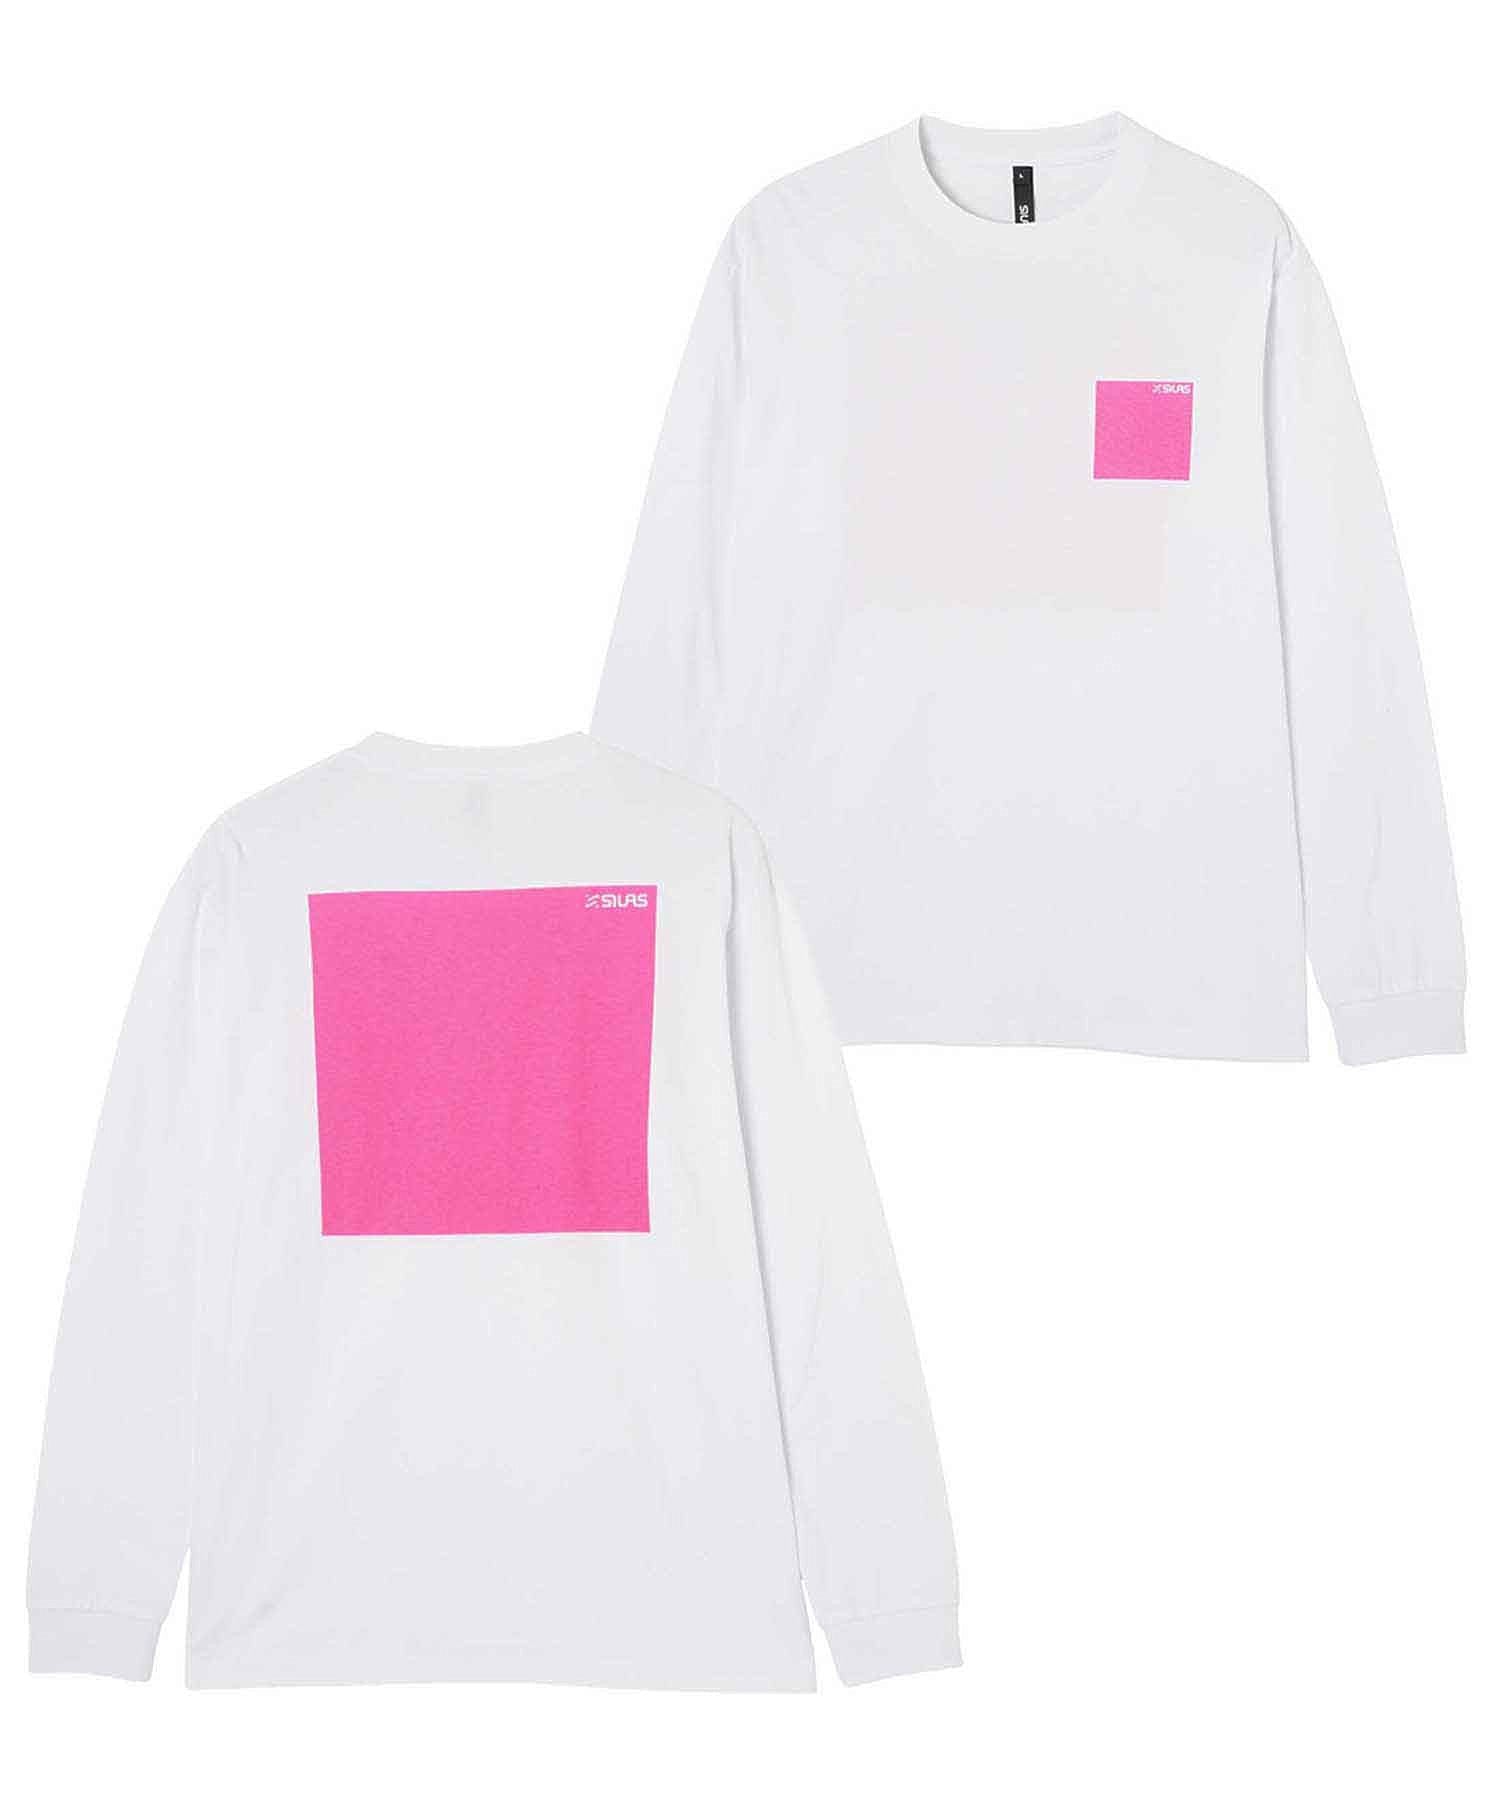 SQUARE L/S TEE SILAS